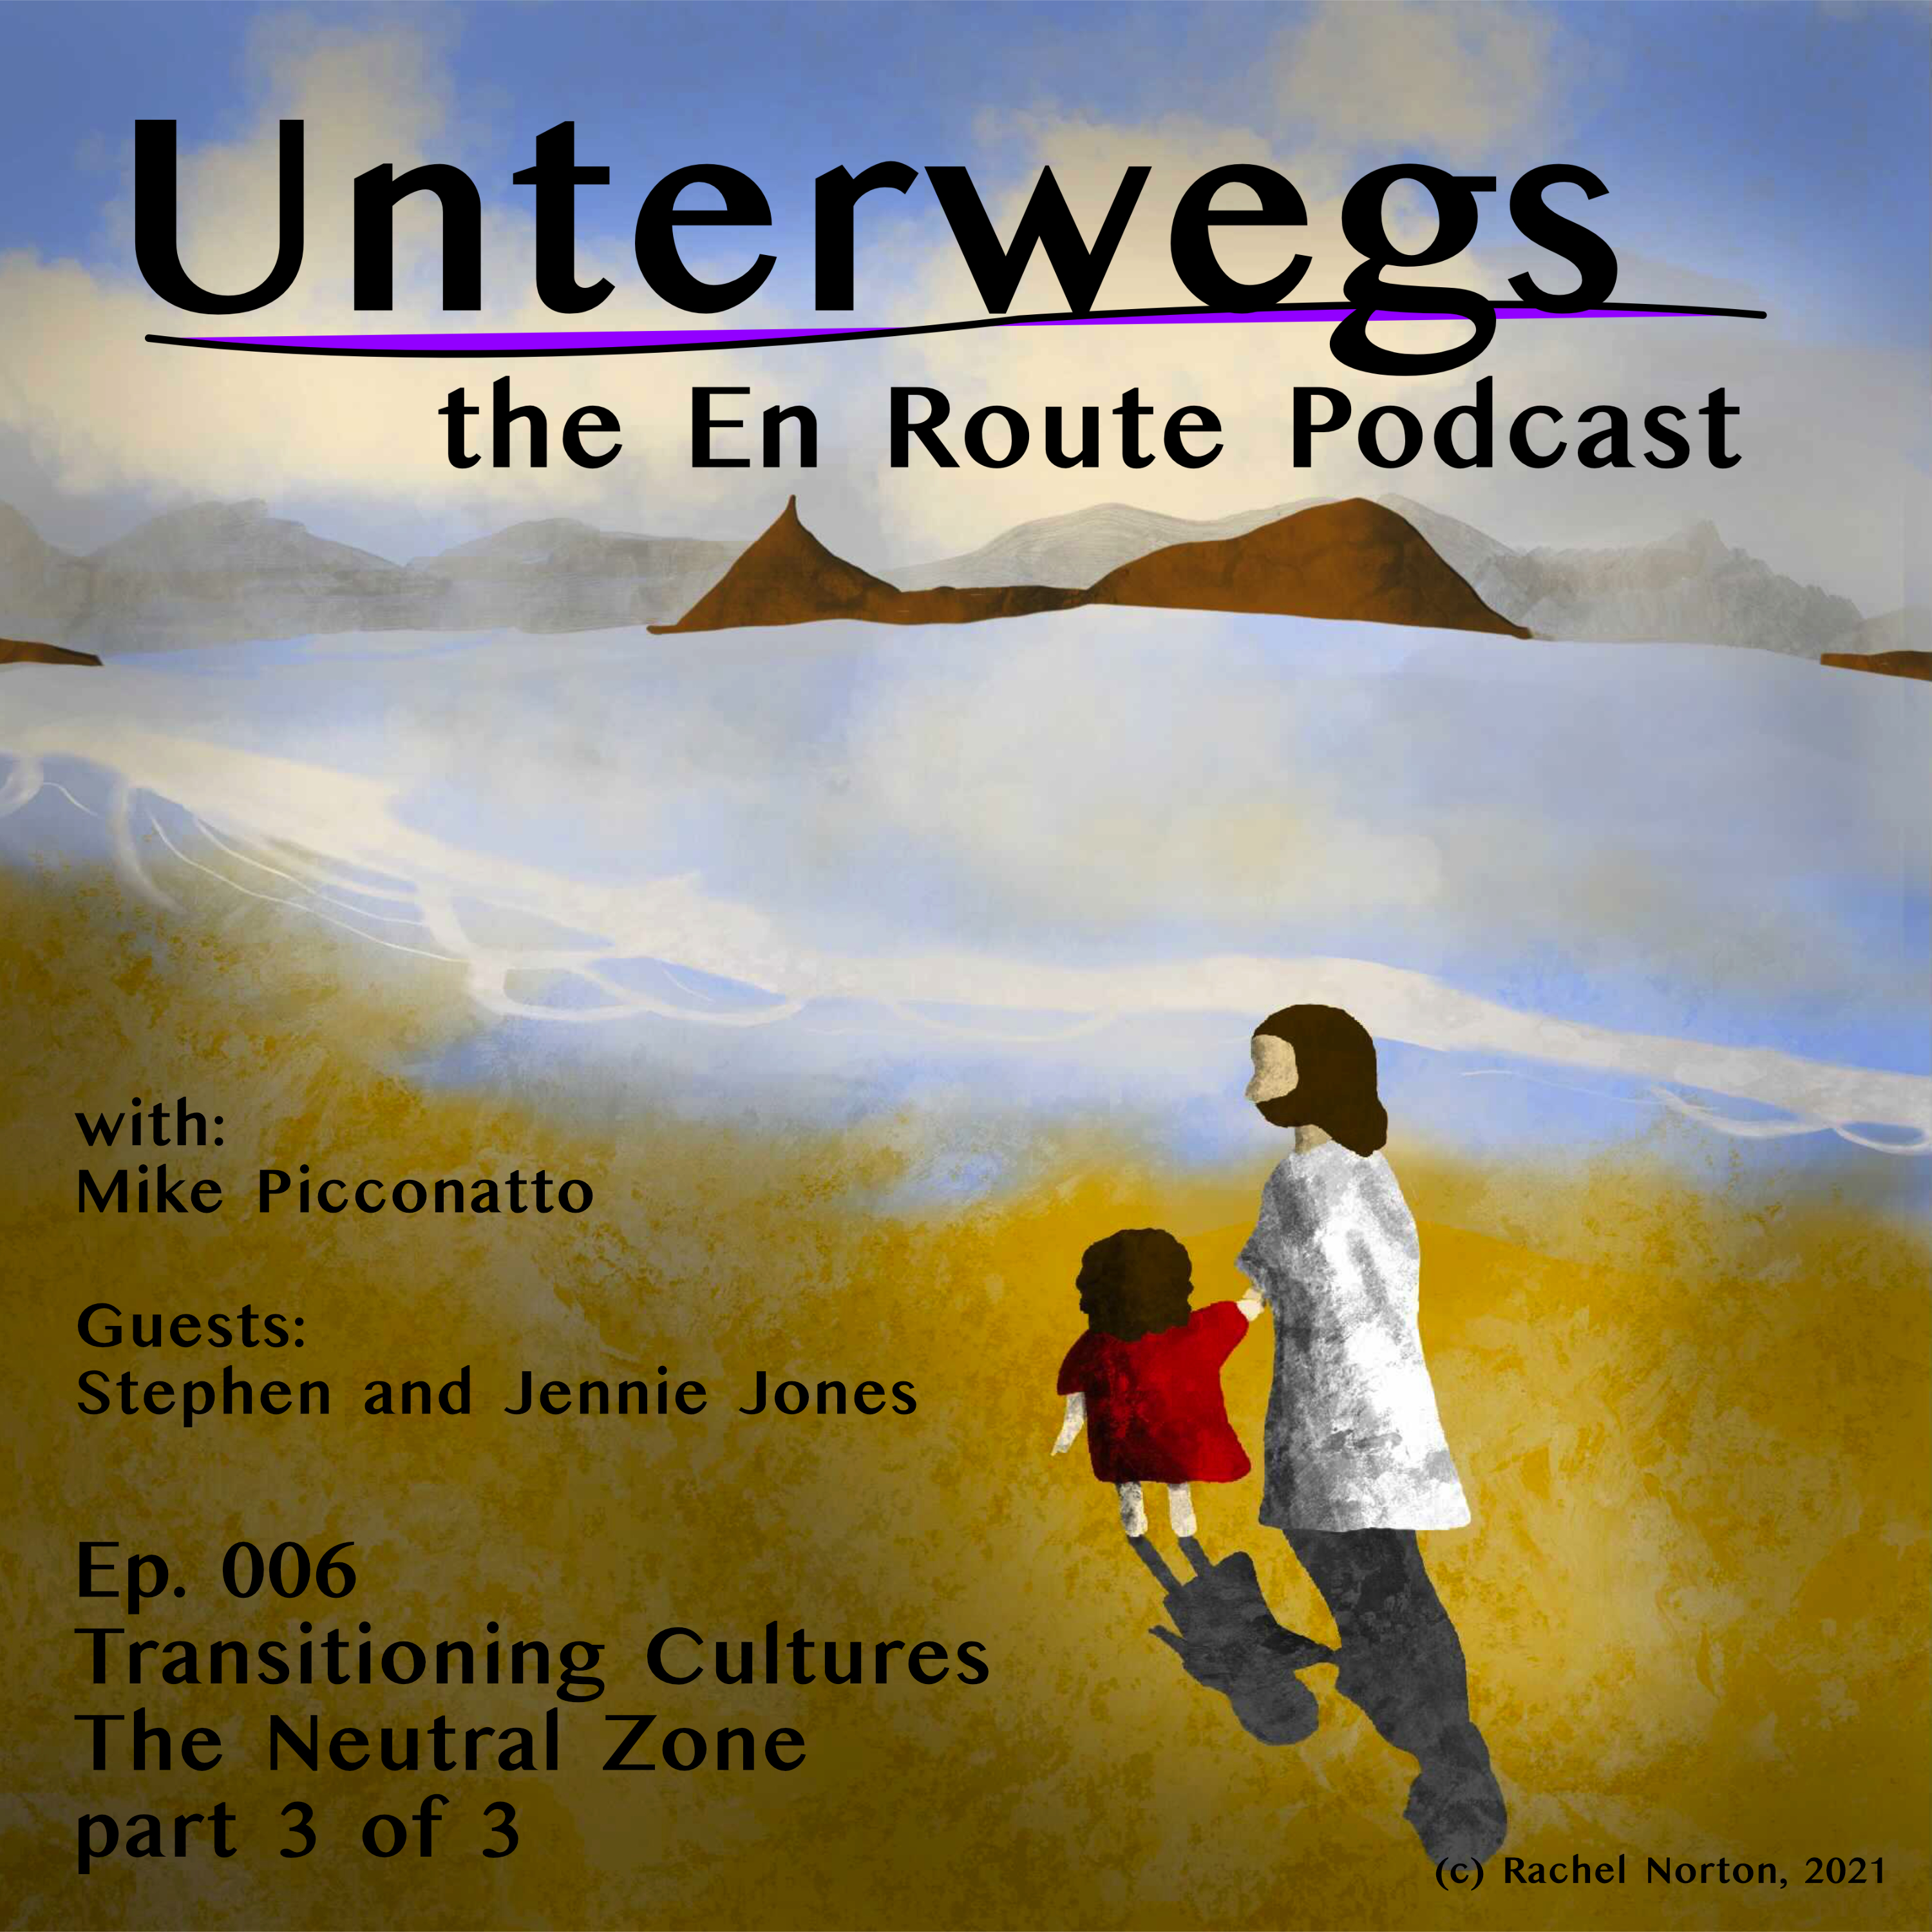 Episode 006 - The Neutral Zone - part 3 of 3